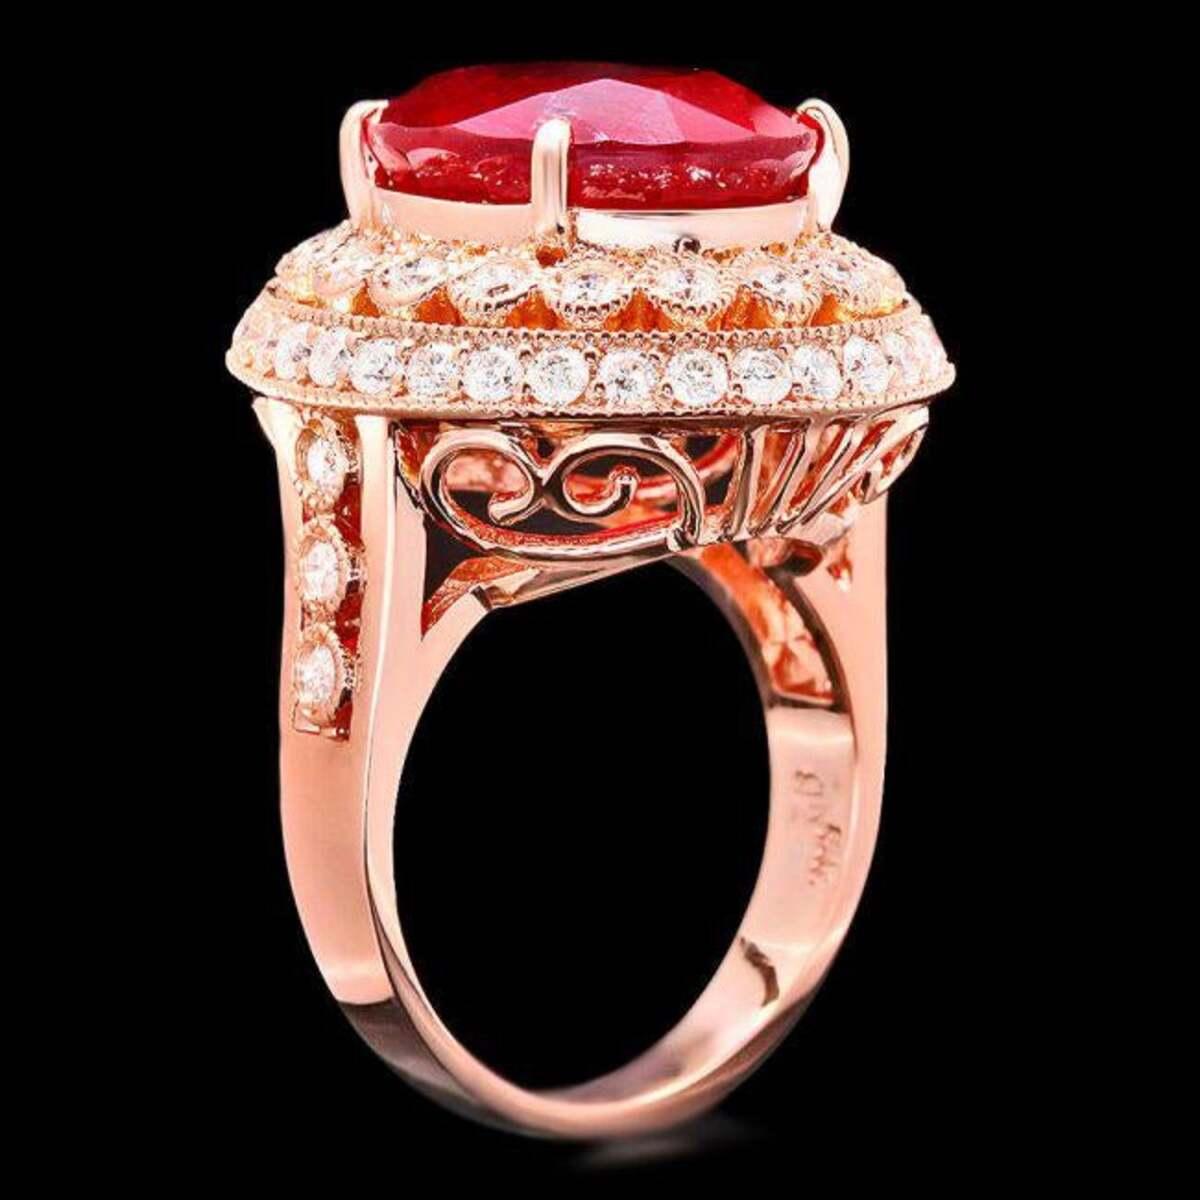 14K Rose Gold 10.85ct Ruby and 1.32ct Diamond Ring